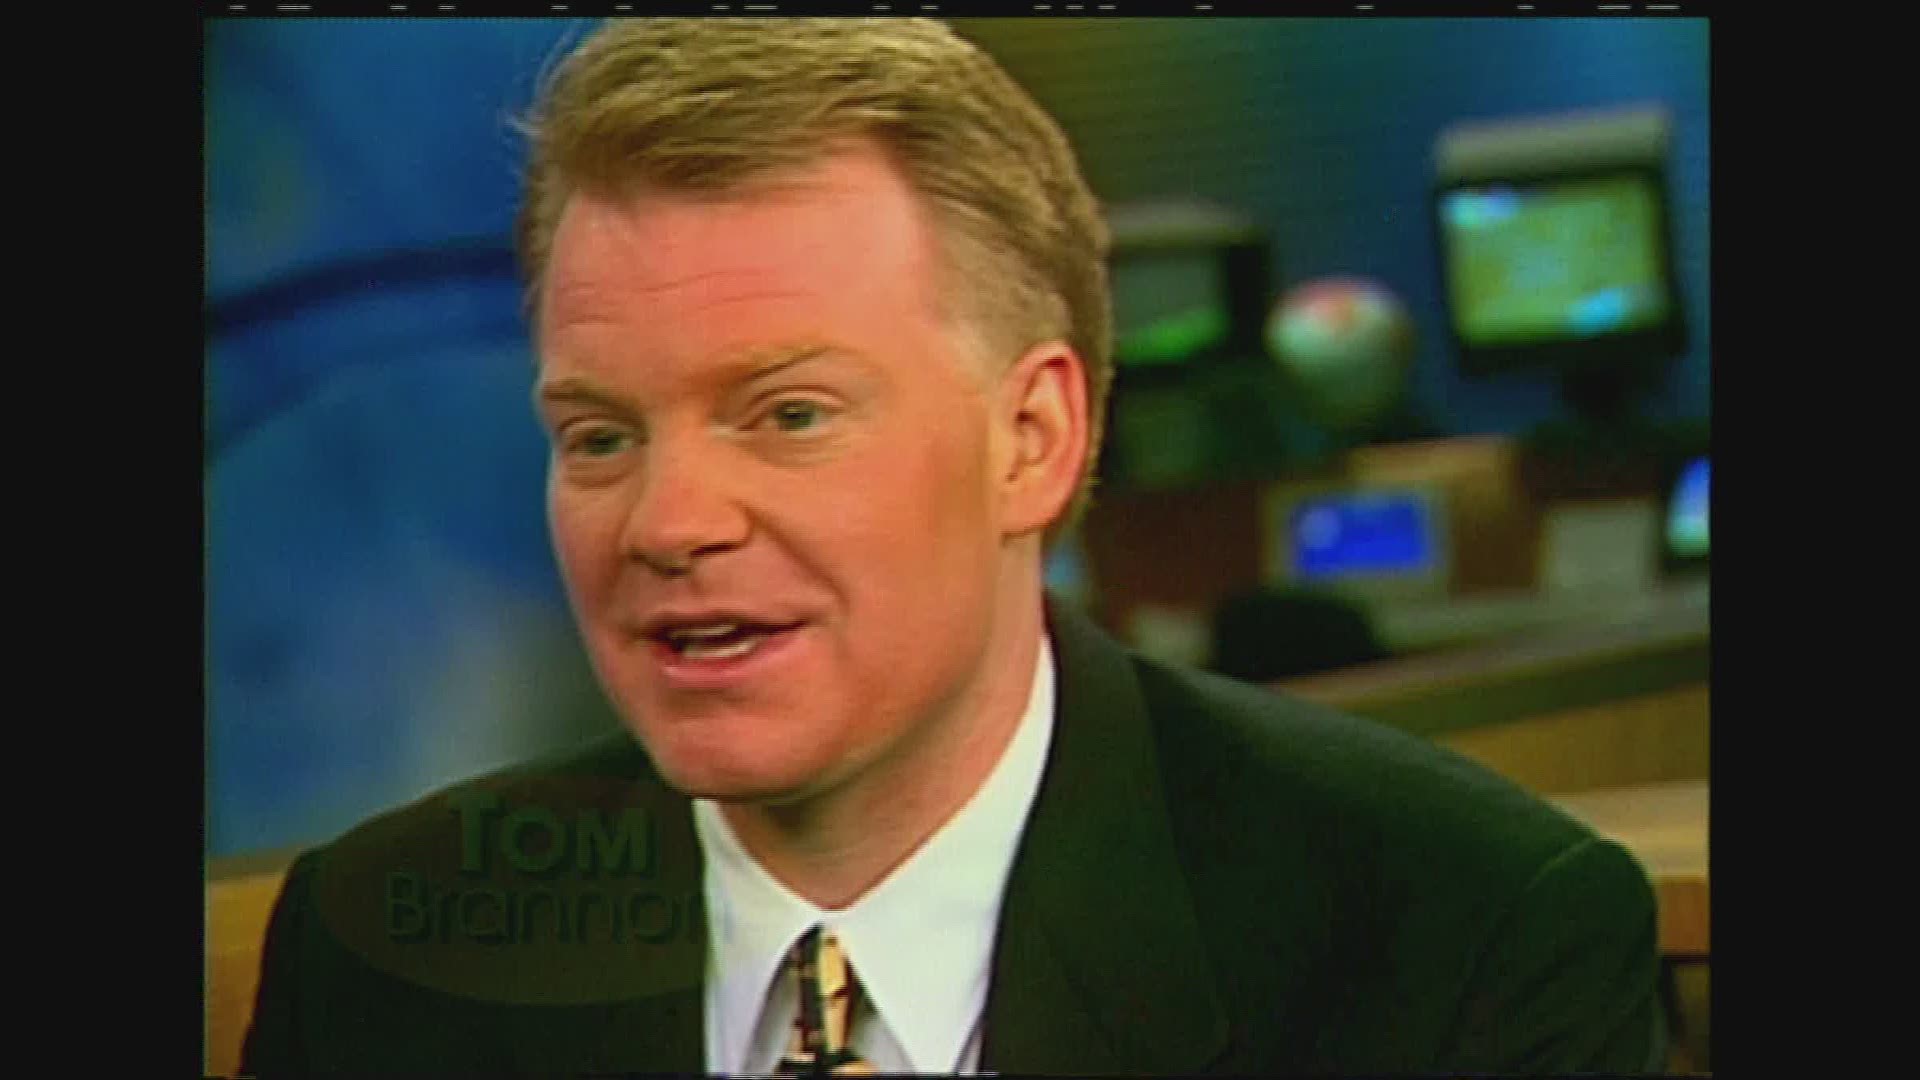 A look back at the career of Tom Brannon here at THV11 over the past 22 years.